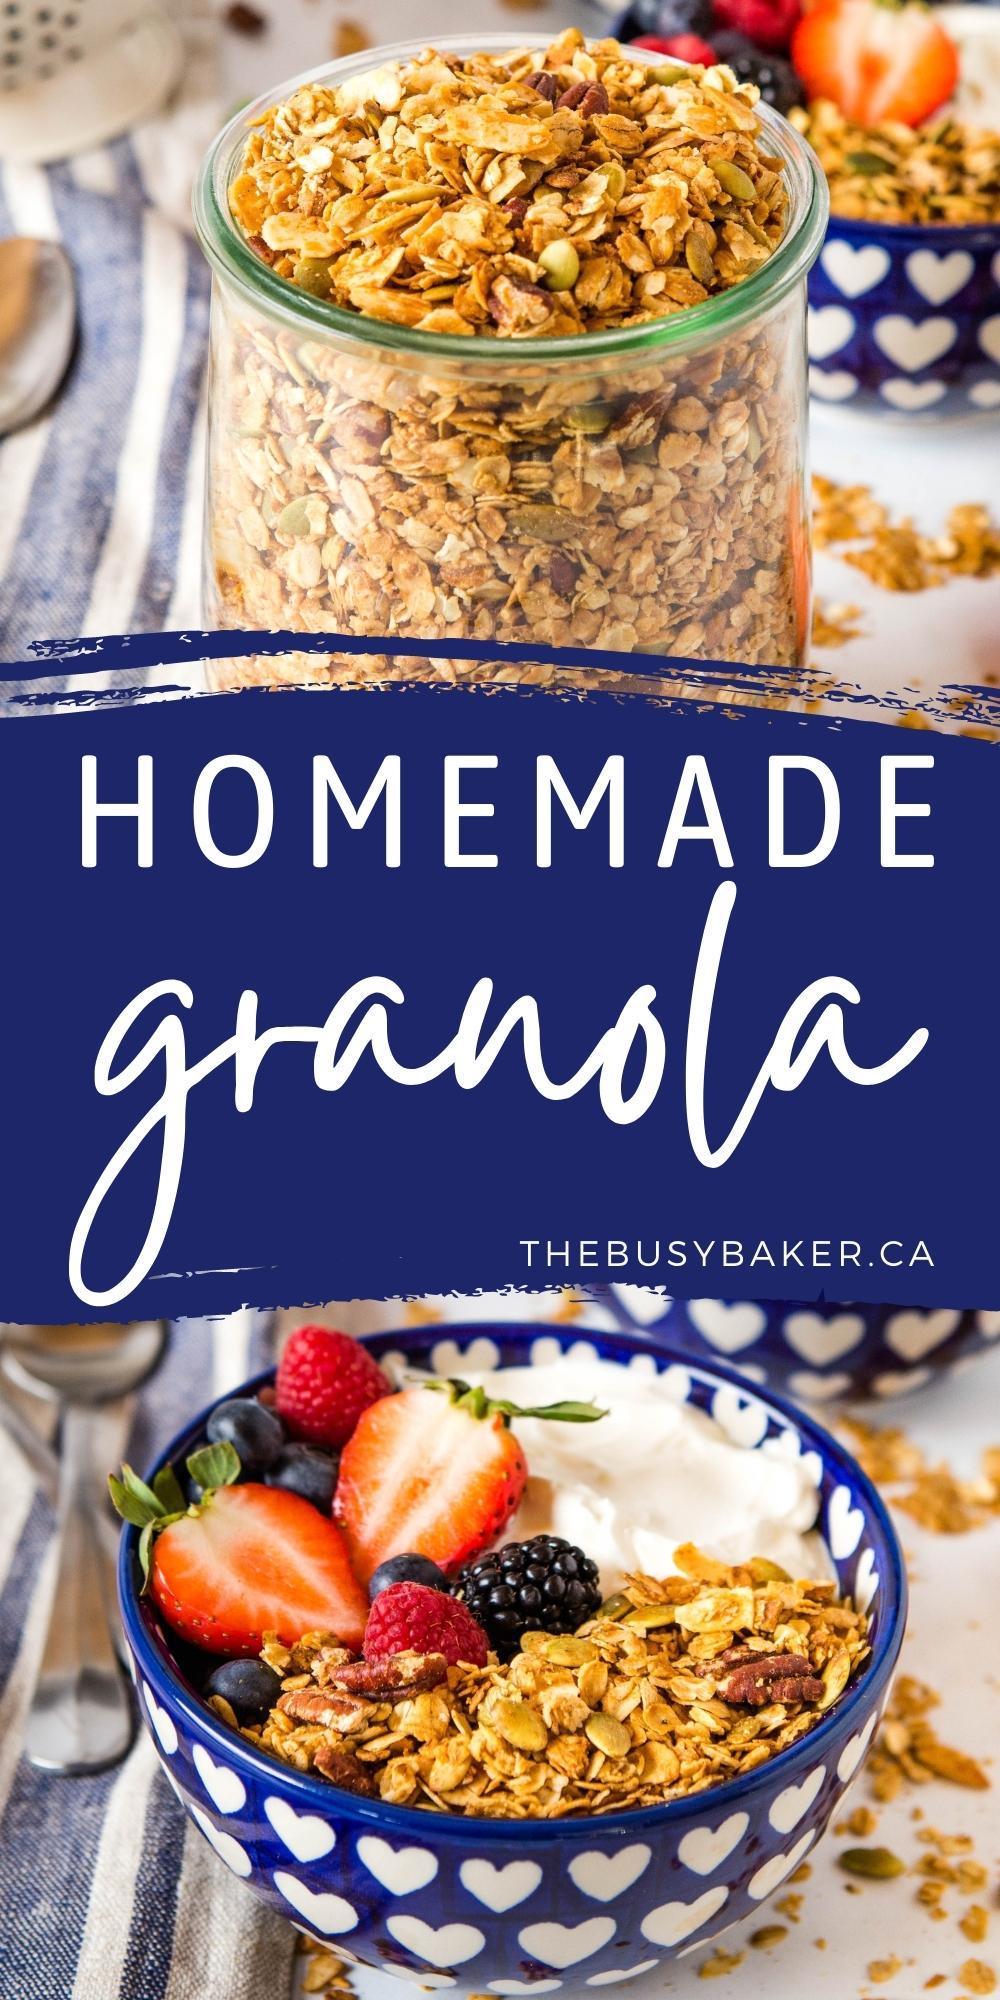 This Homemade Granola recipe is the perfect easy make-ahead breakfast or snack - made with oats, honey or maple syrup, nuts, and seeds in under 30 minutes! Recipe from thebusybaker.ca! #granola #homemade #healthy #wholegrain #snack #vegetarian #vegan #health #refinedsugarfree #breakfast via @busybakerblog